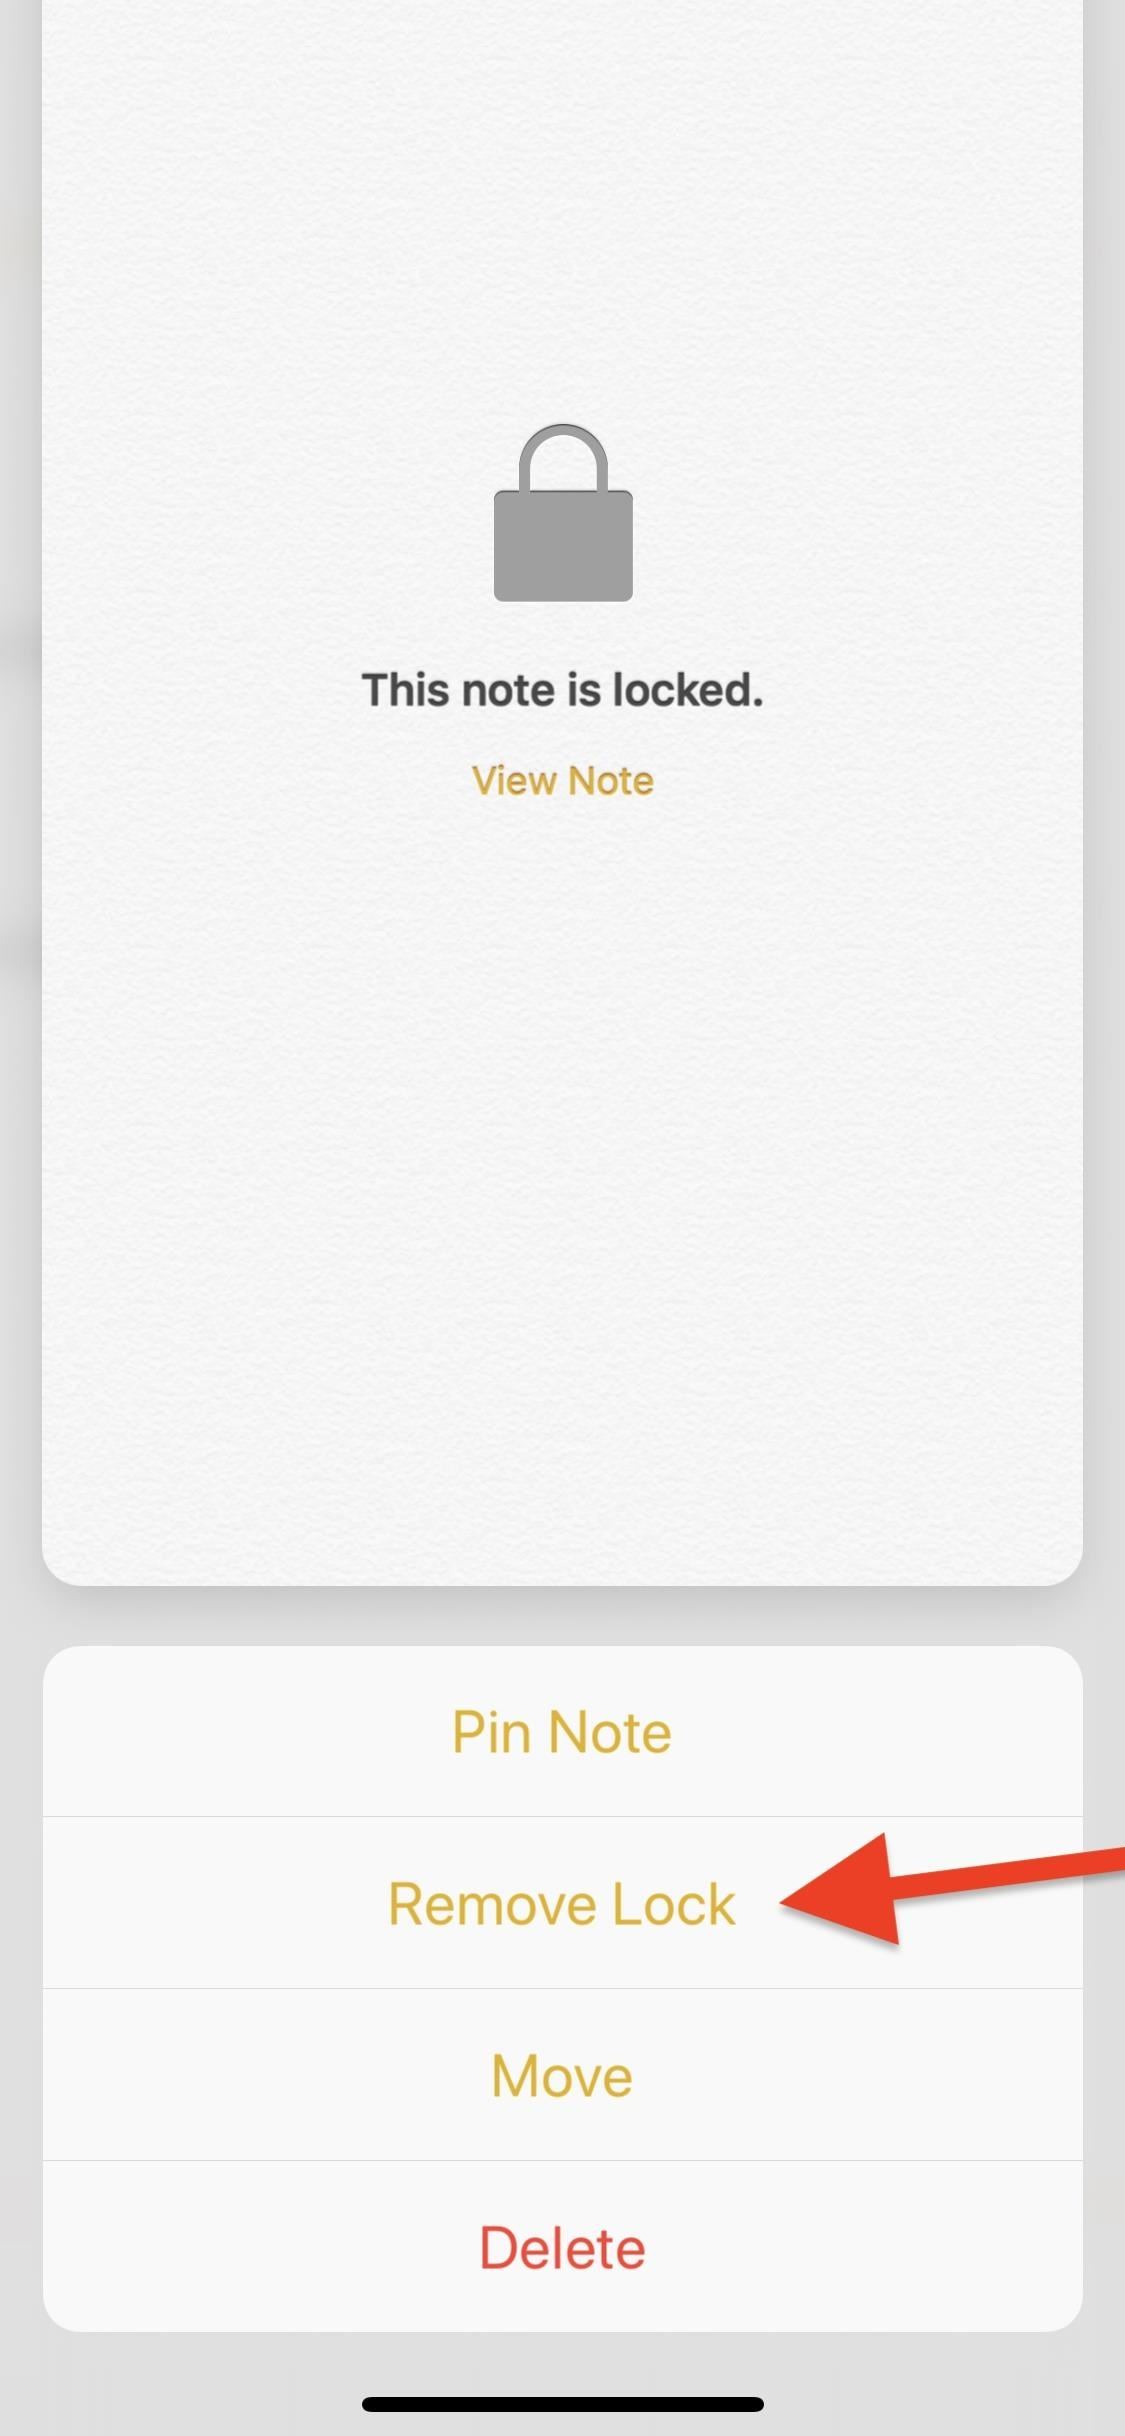 Notes 101: How to Lock Notes with Face ID or Touch ID (& Password Protection)